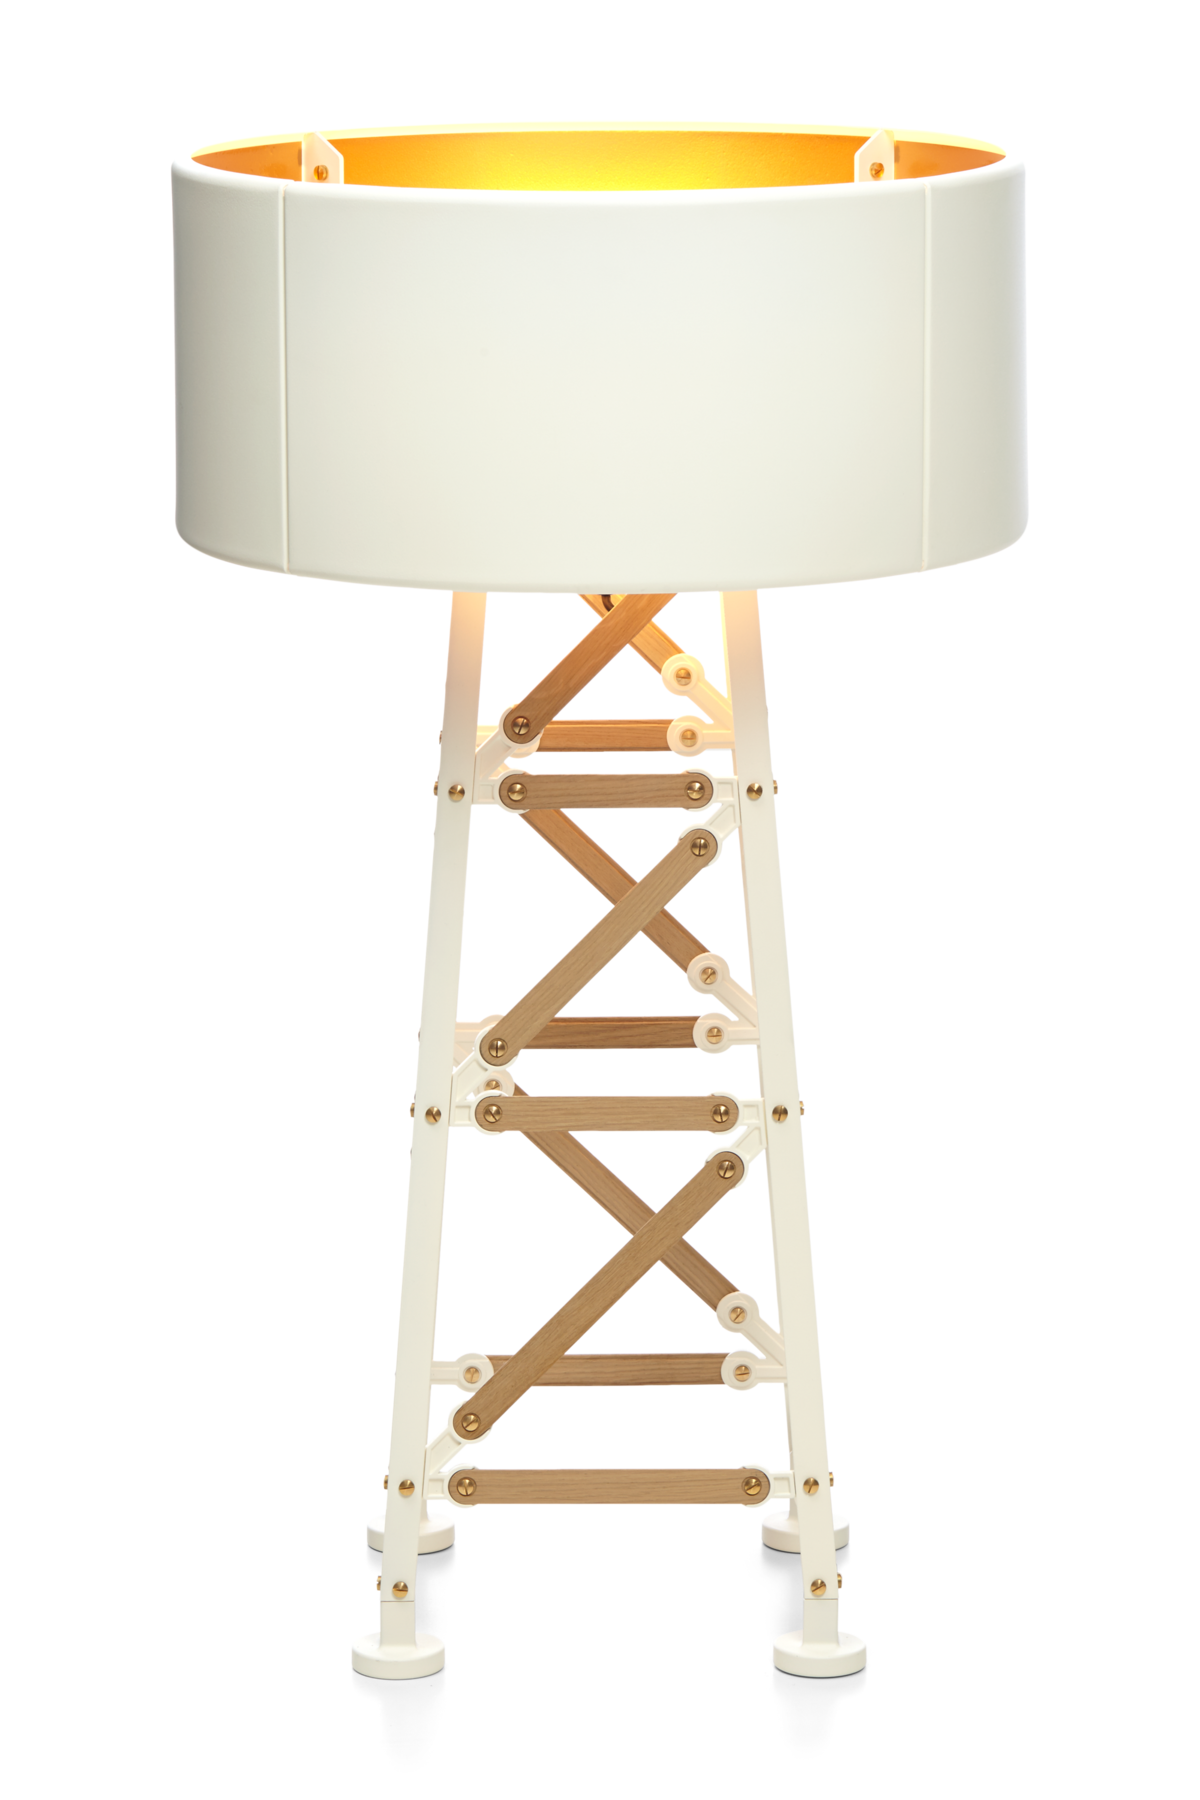 Frontview of The Moooi Construction Lamp in the small size and in the colour white.